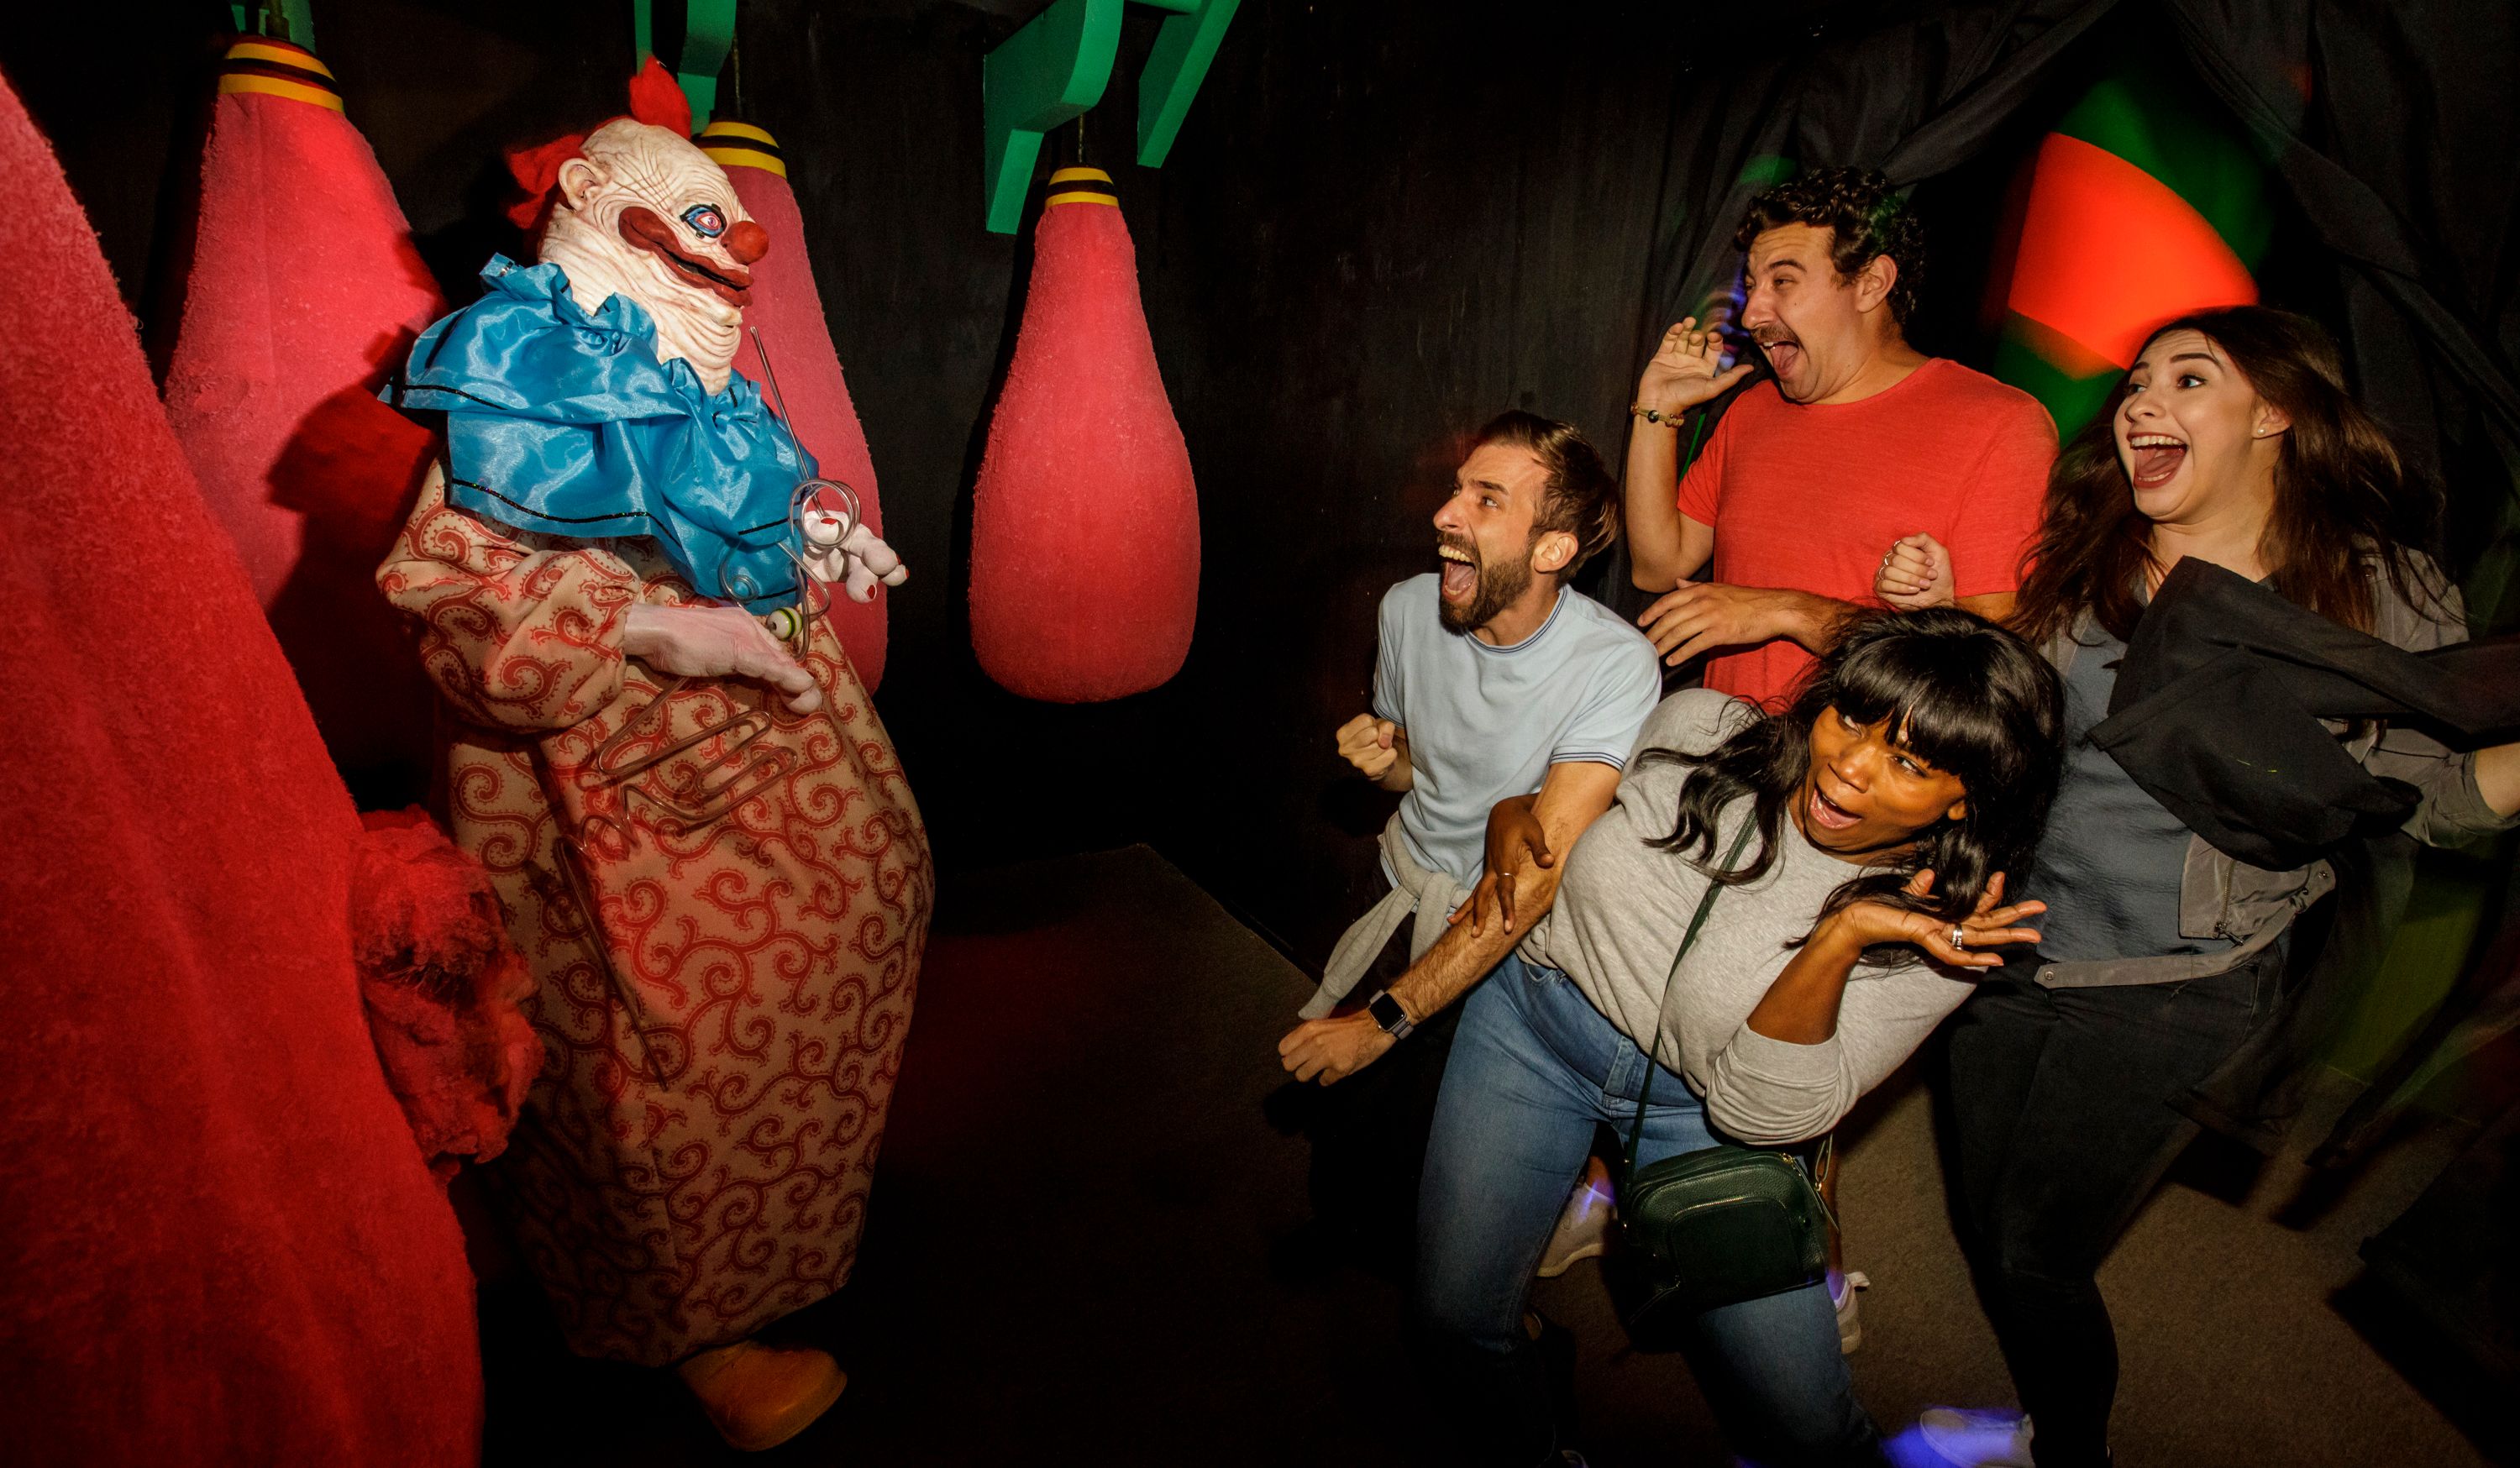 Killer Klowns from Outerspace Maze